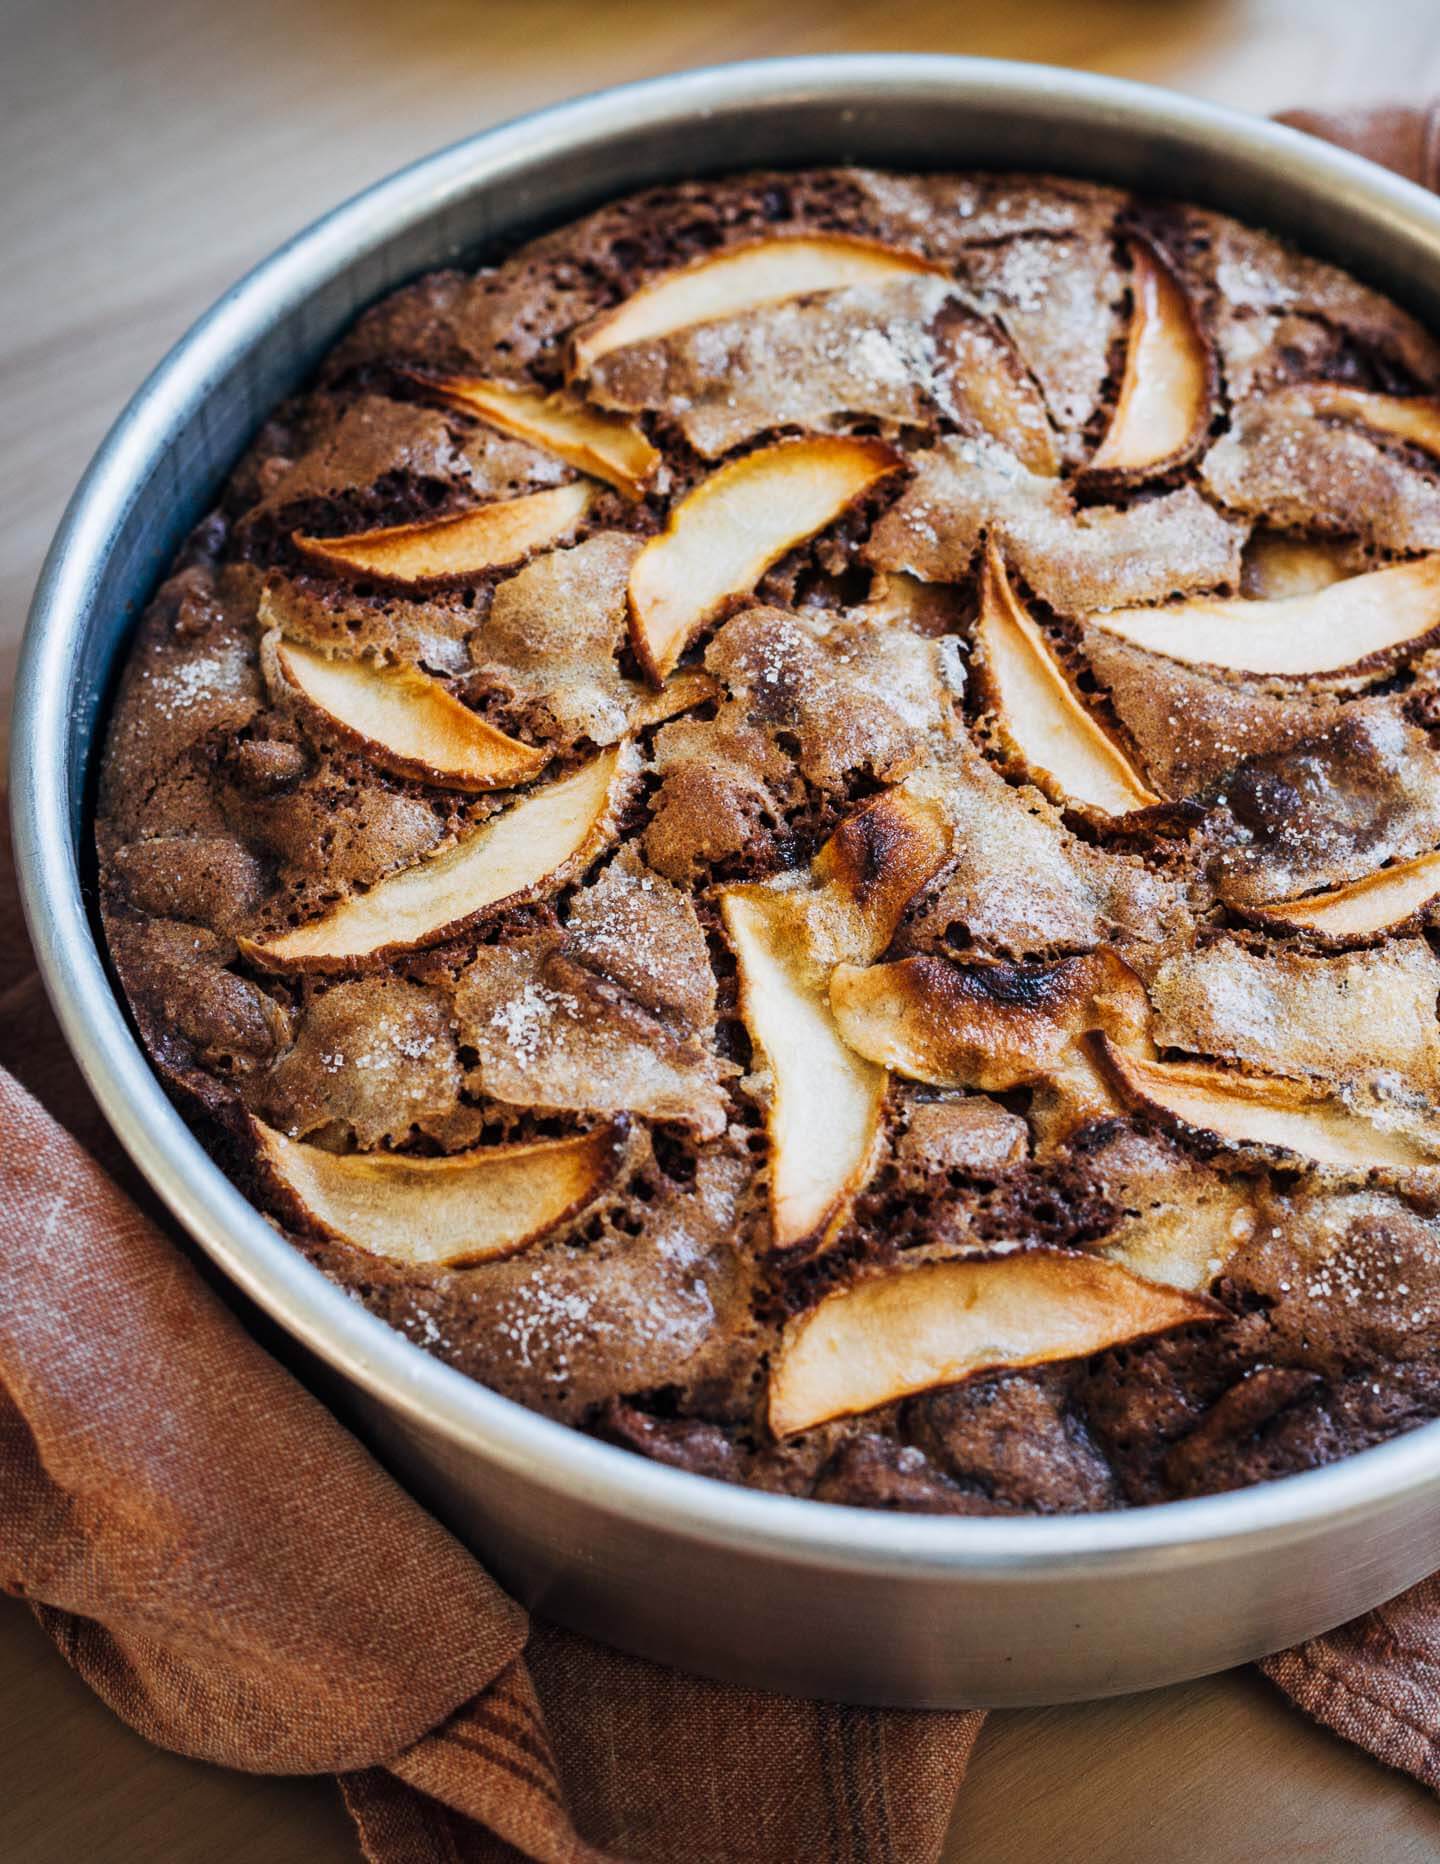 Baked apple cake in the pan